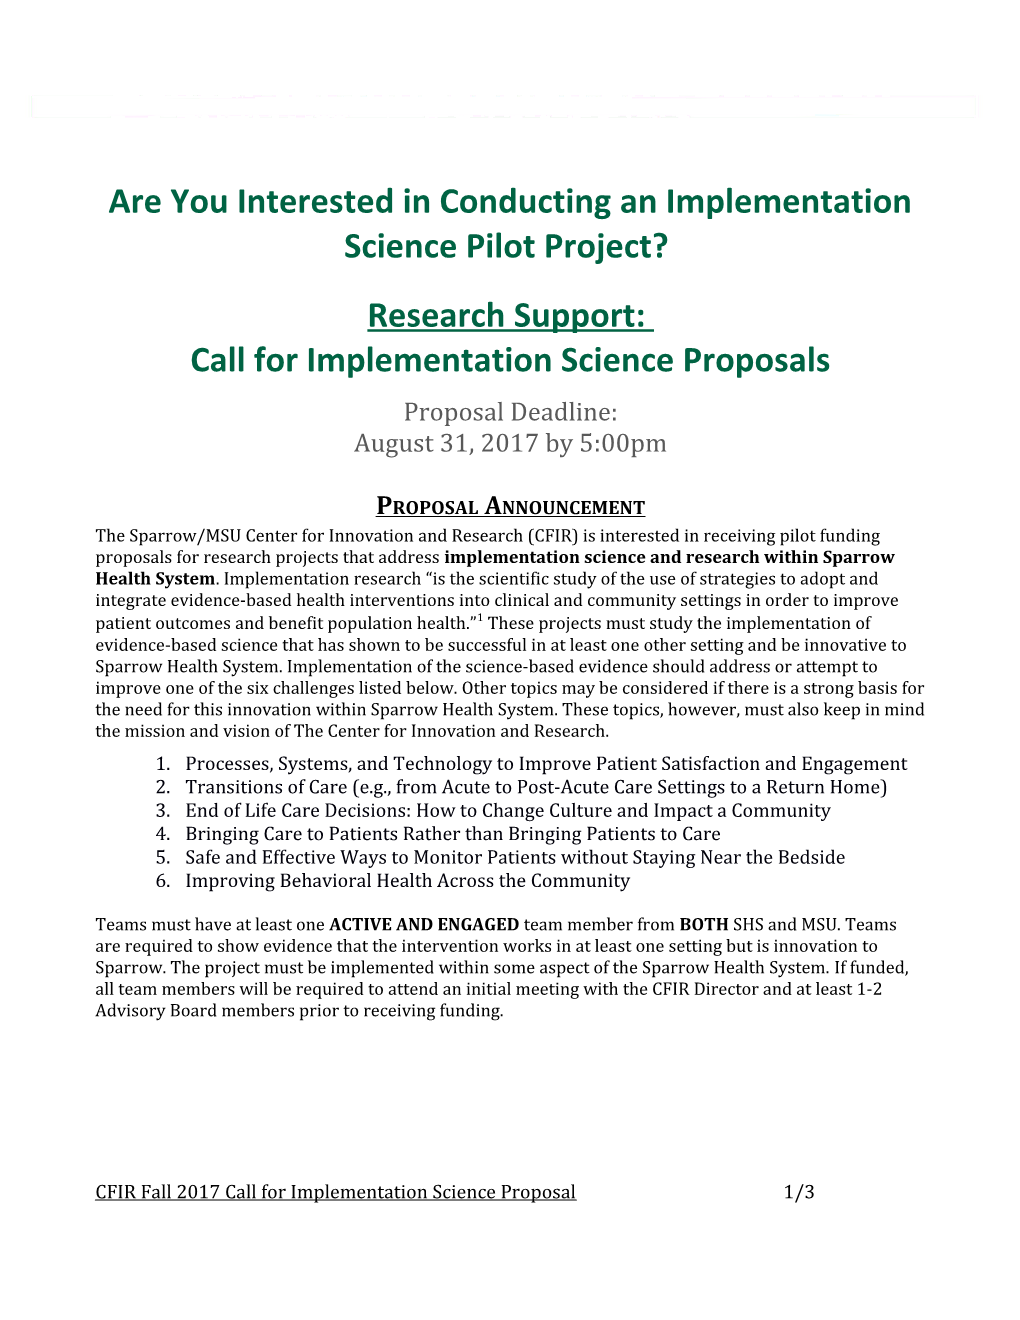 Are You Interested in Conducting an Implementation Science Pilot Project?